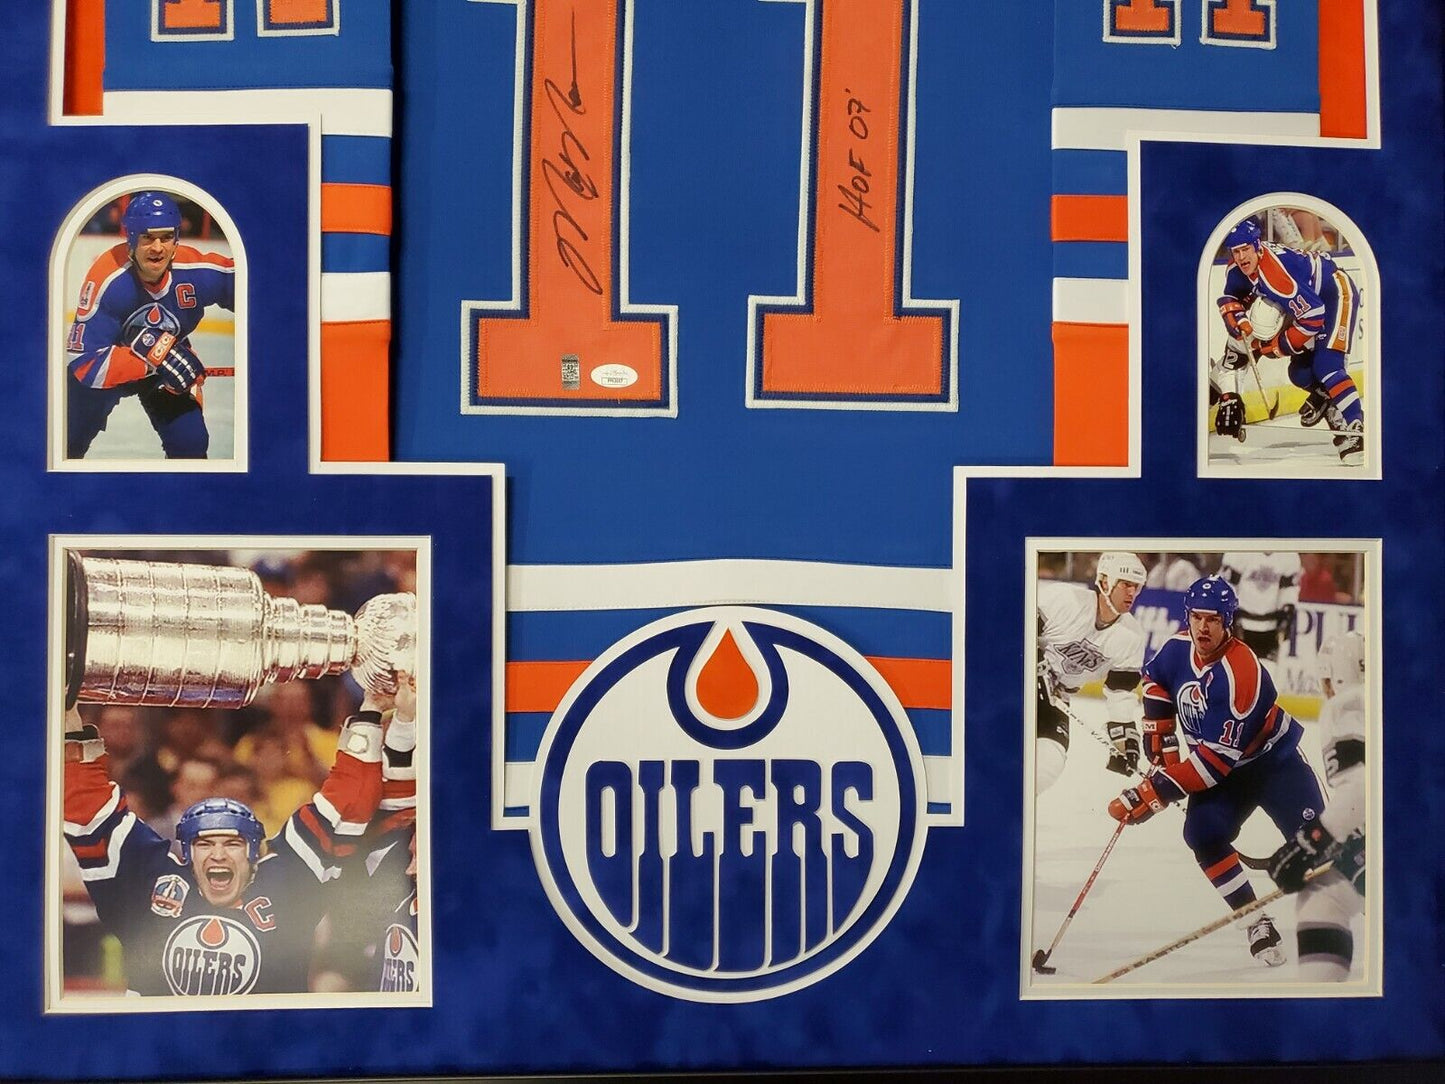 MVP Authentics Framed Edmonton Oilers Mark Messier Signed Jersey Jsa/Collectible Exch. Dual Coa 719.10 sports jersey framing , jersey framing